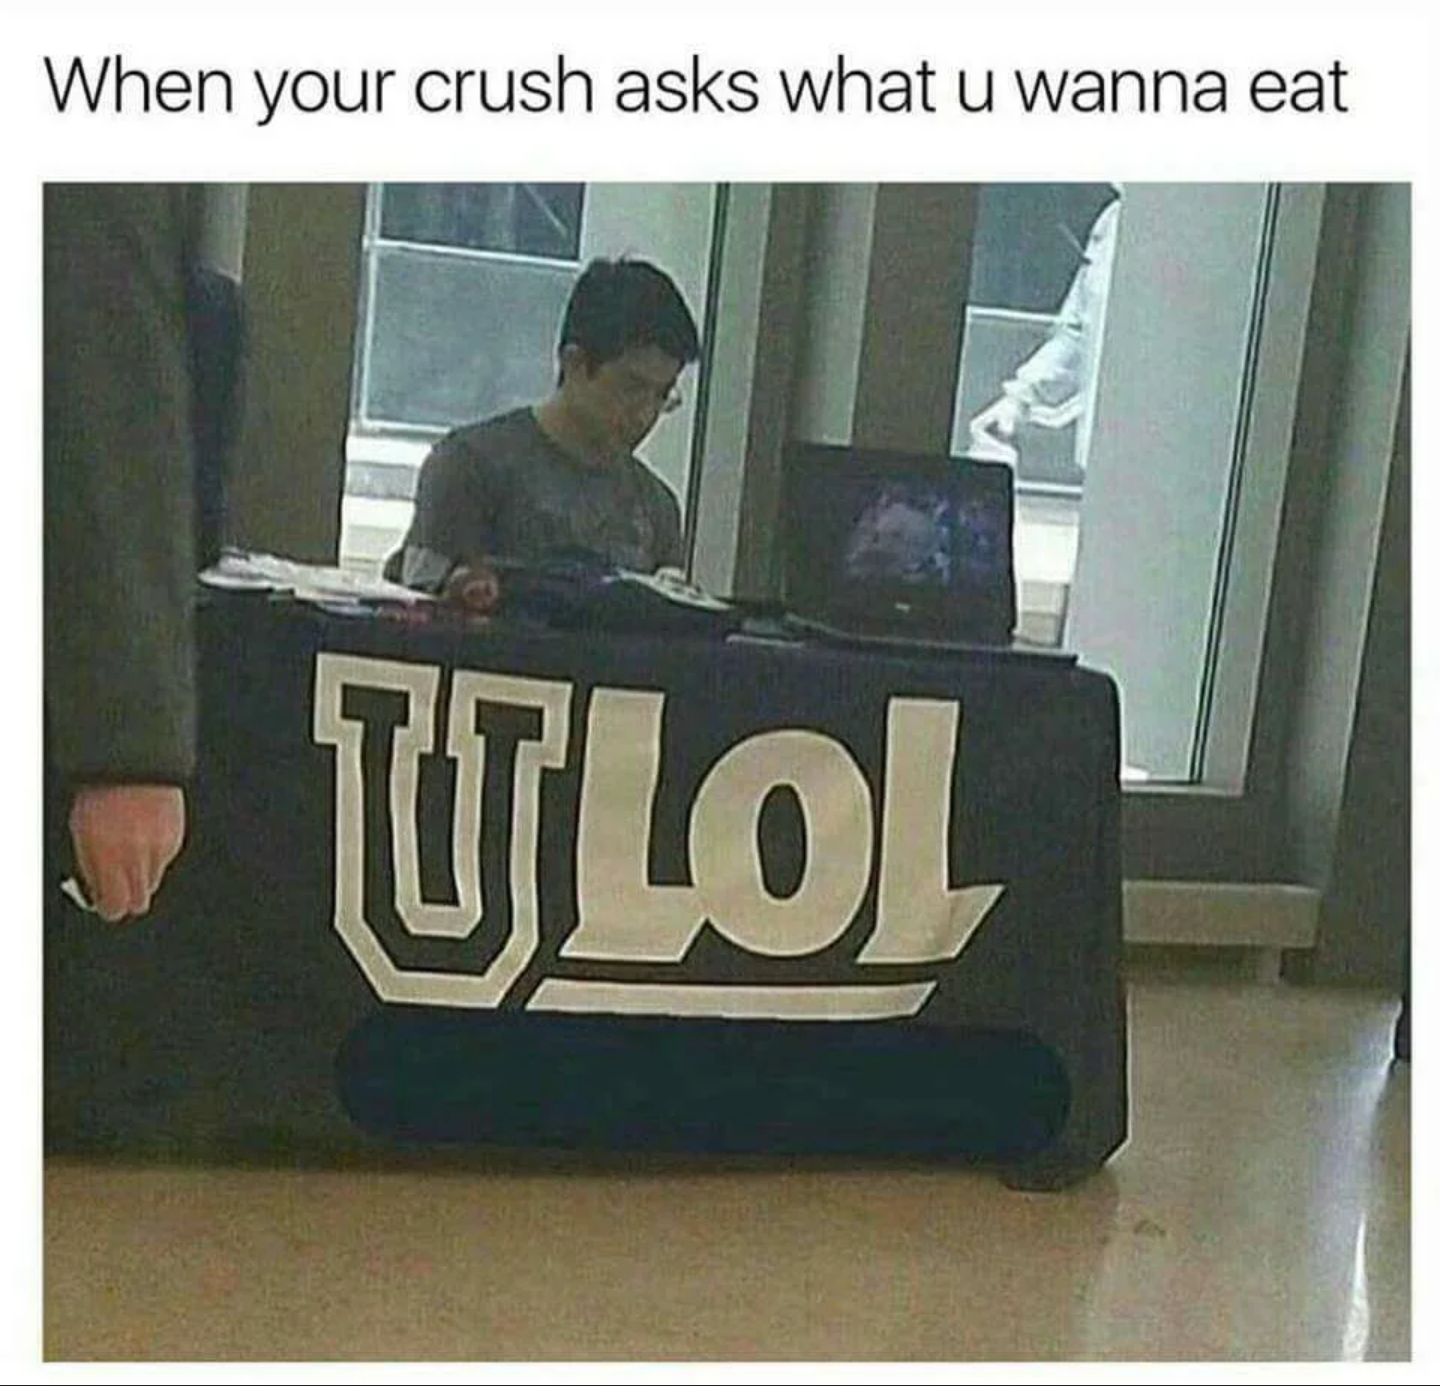 your crush asks you what you want - When your crush asks what u wanna eat Ulol